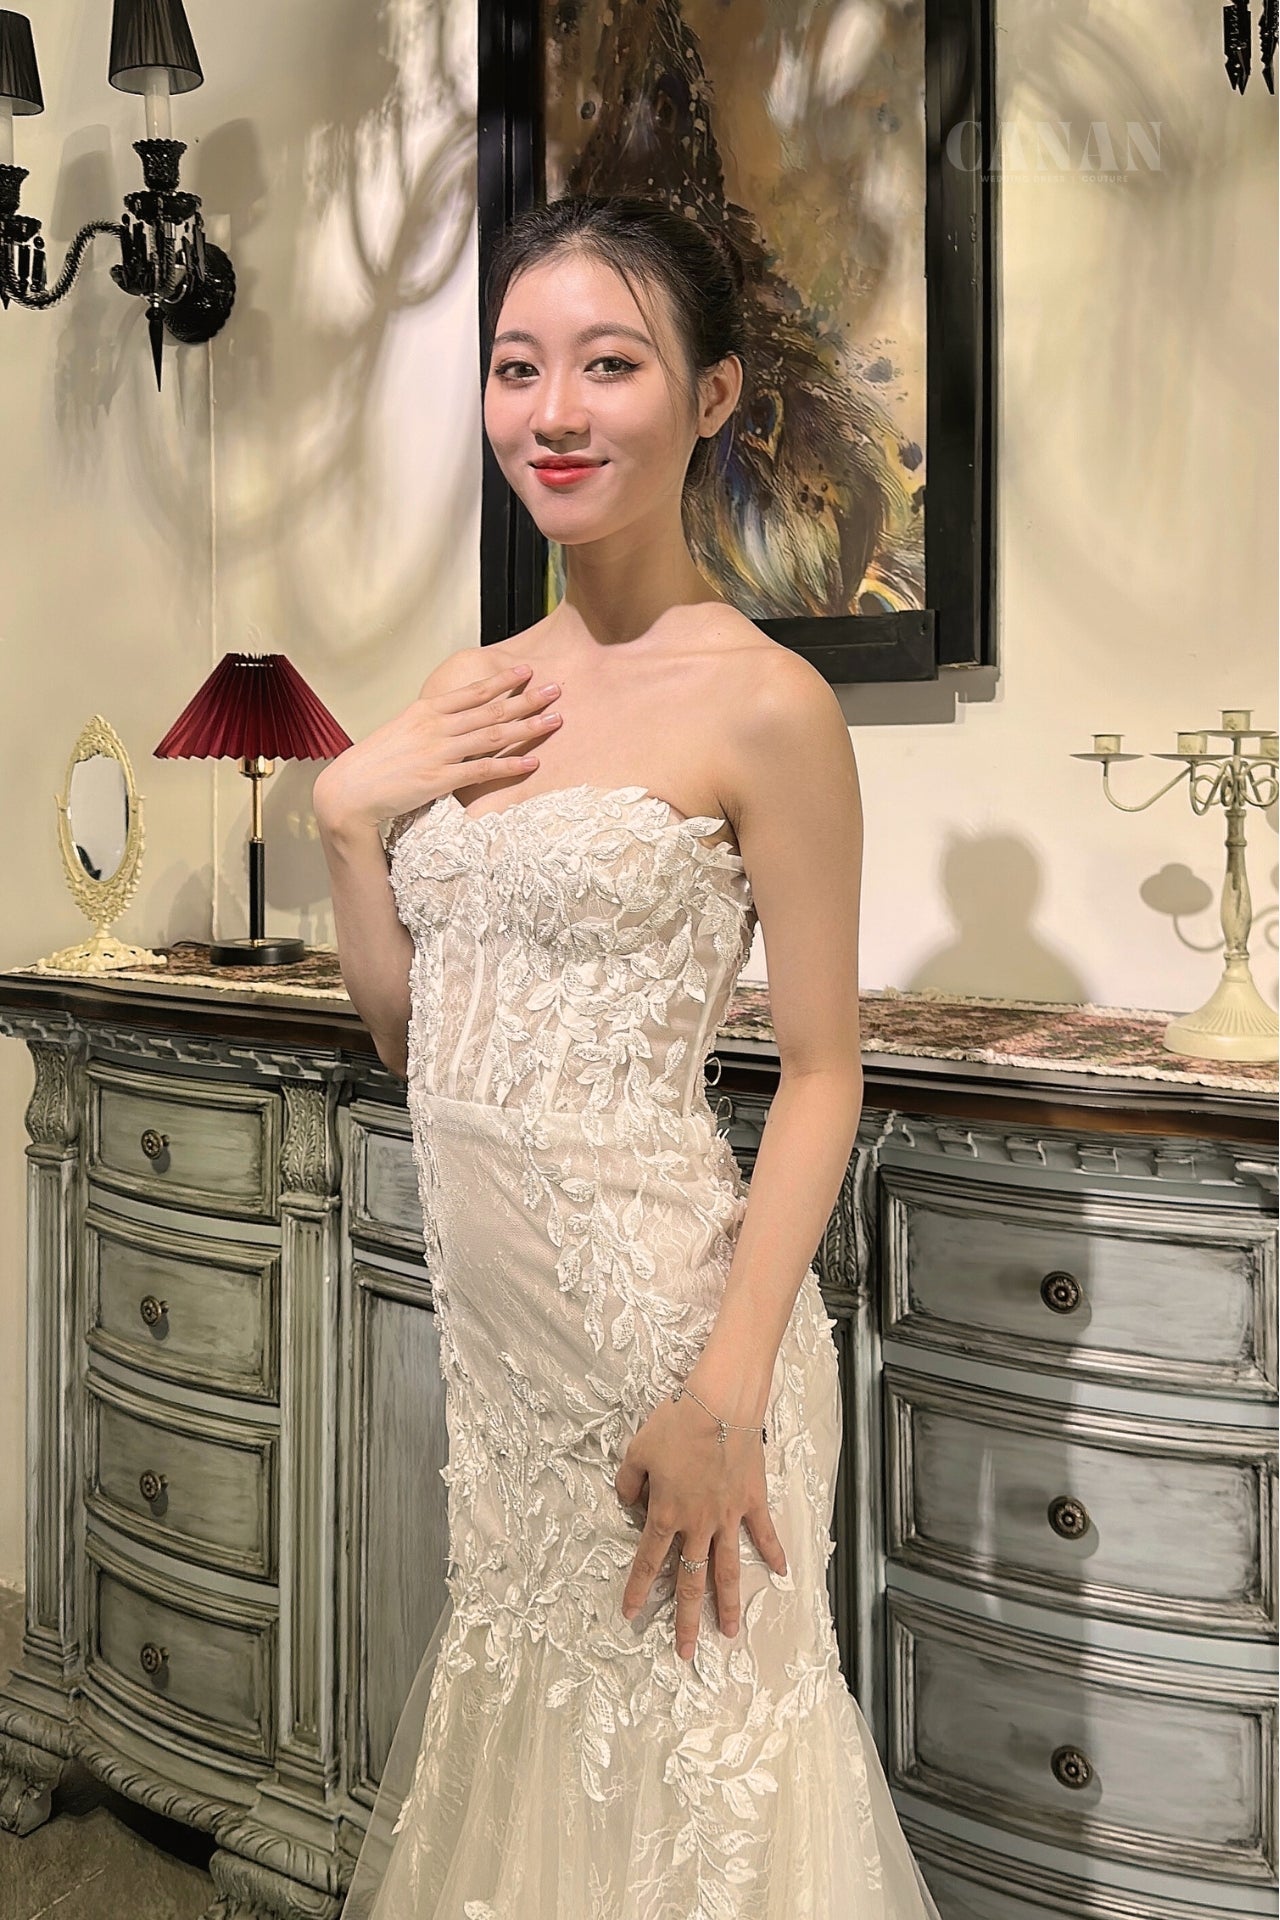 Erina - Corset Mermaid Wedding Dress with Delicate Floral Lace